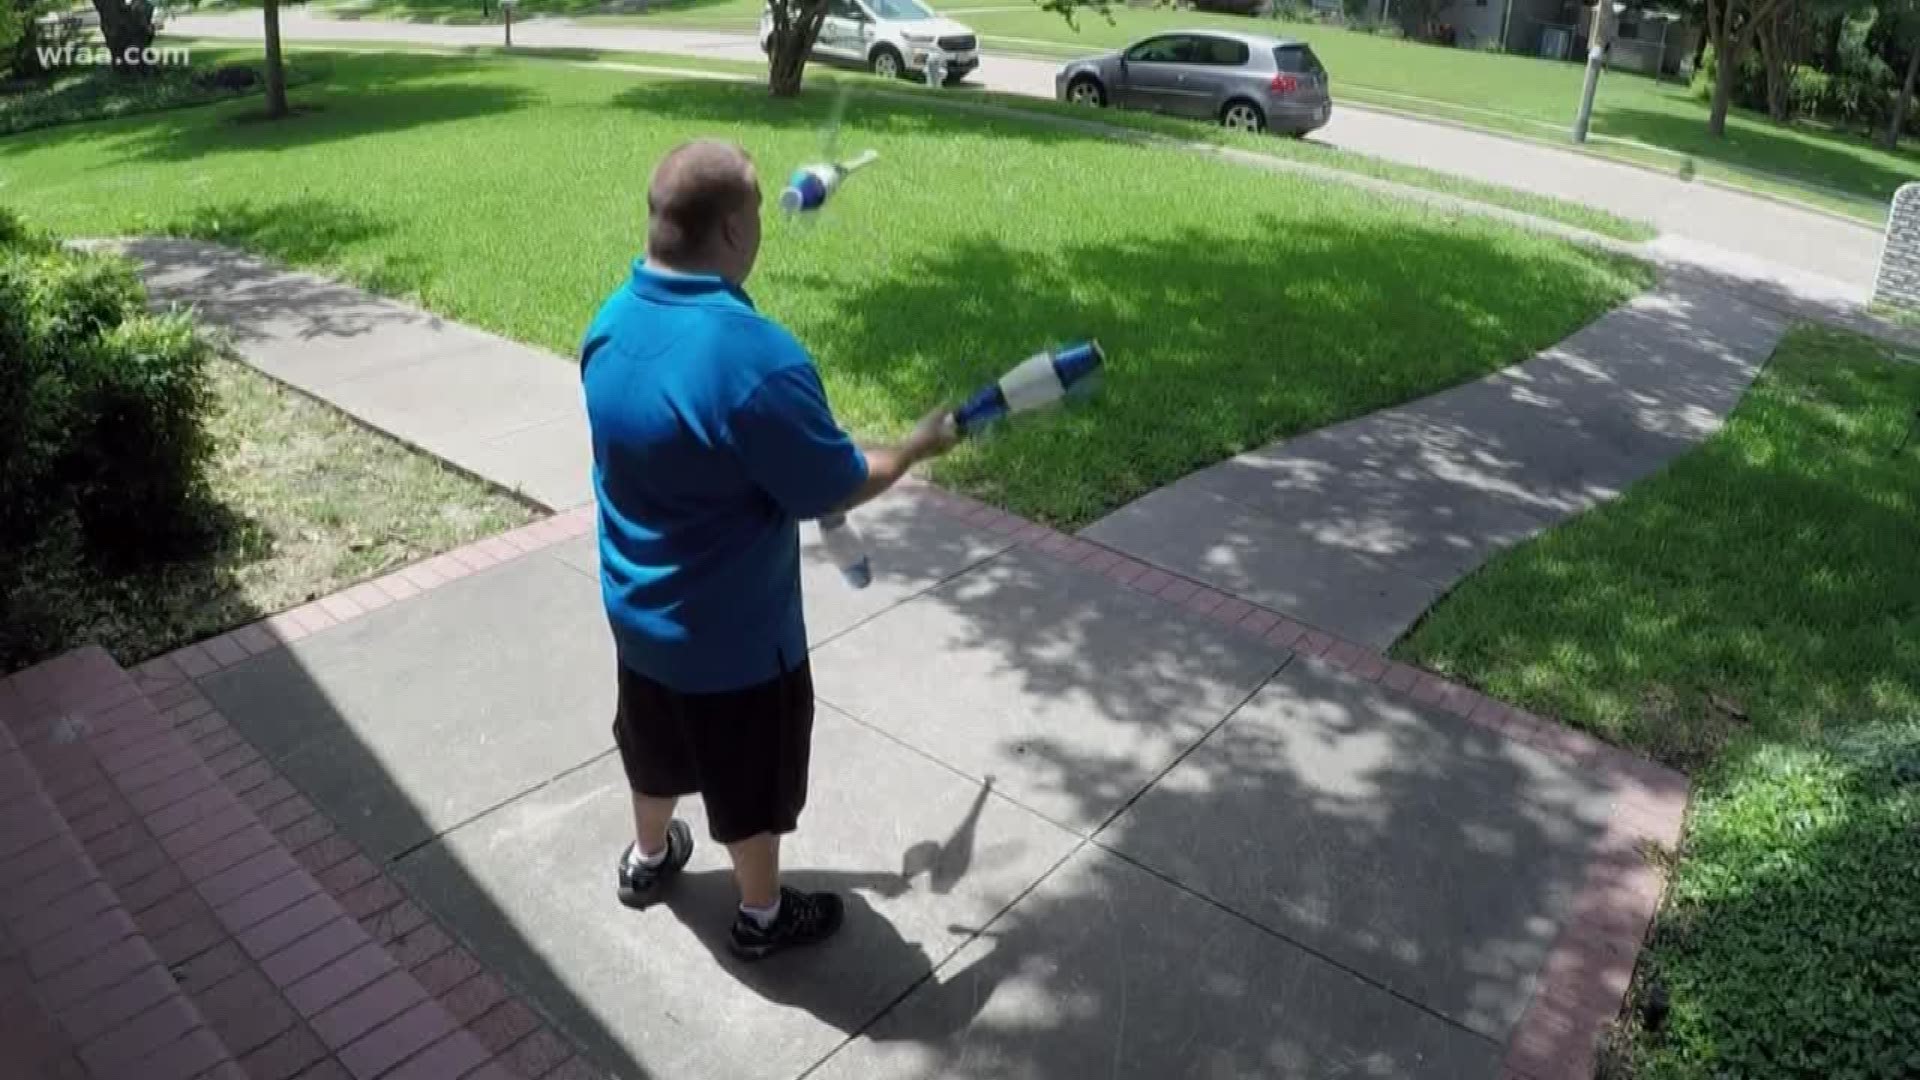 Giggybytes: Juggling anything that comes his way